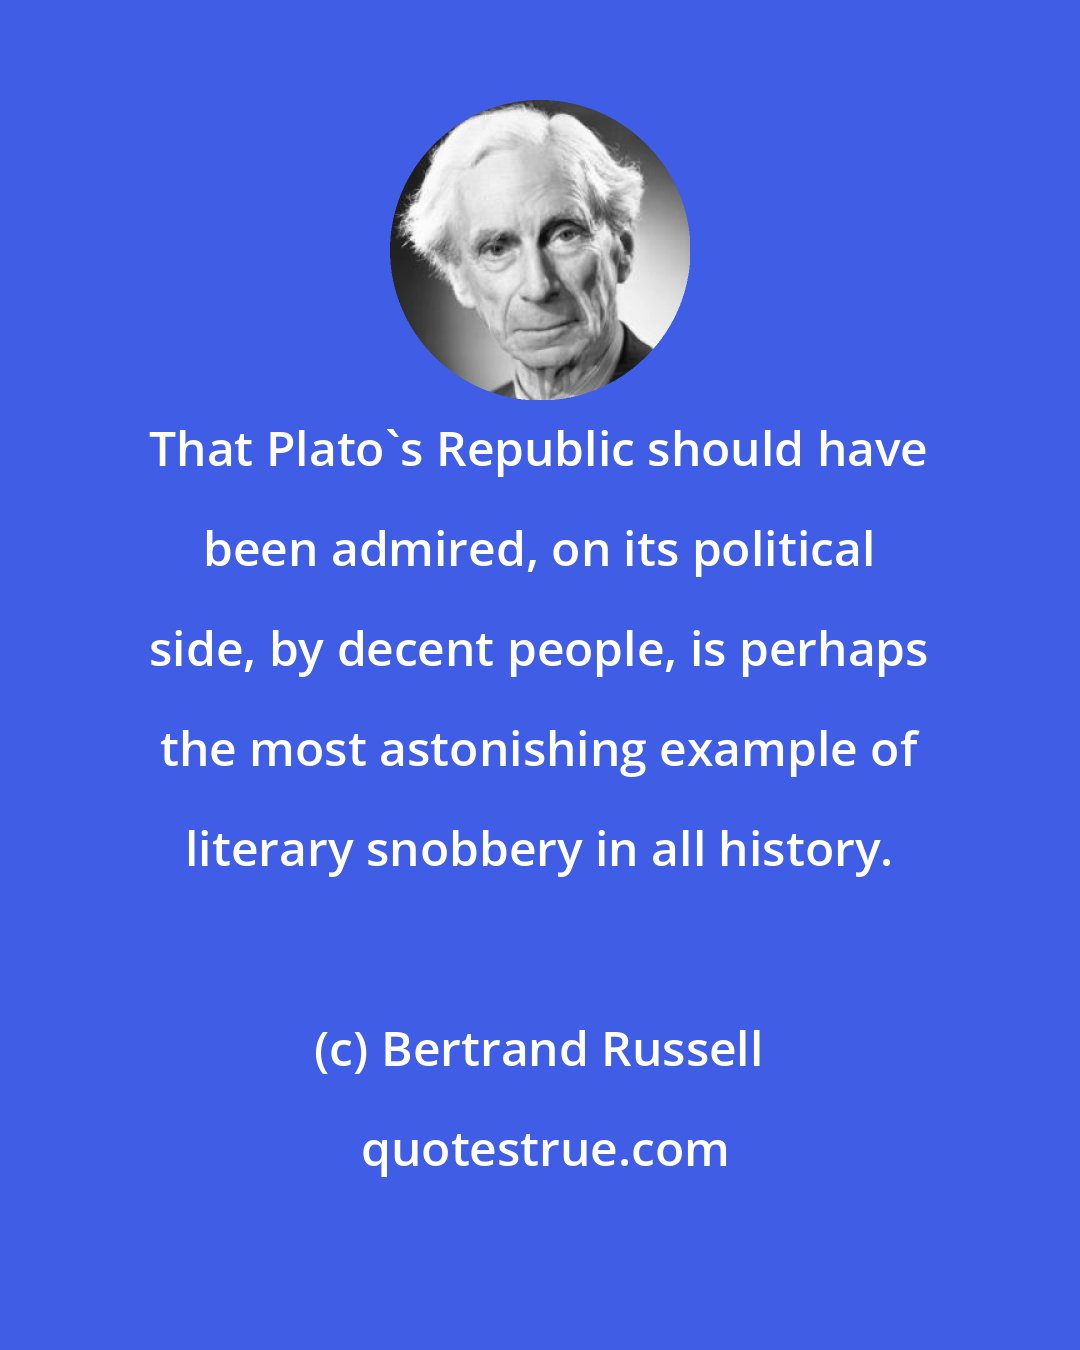 Bertrand Russell: That Plato's Republic should have been admired, on its political side, by decent people, is perhaps the most astonishing example of literary snobbery in all history.